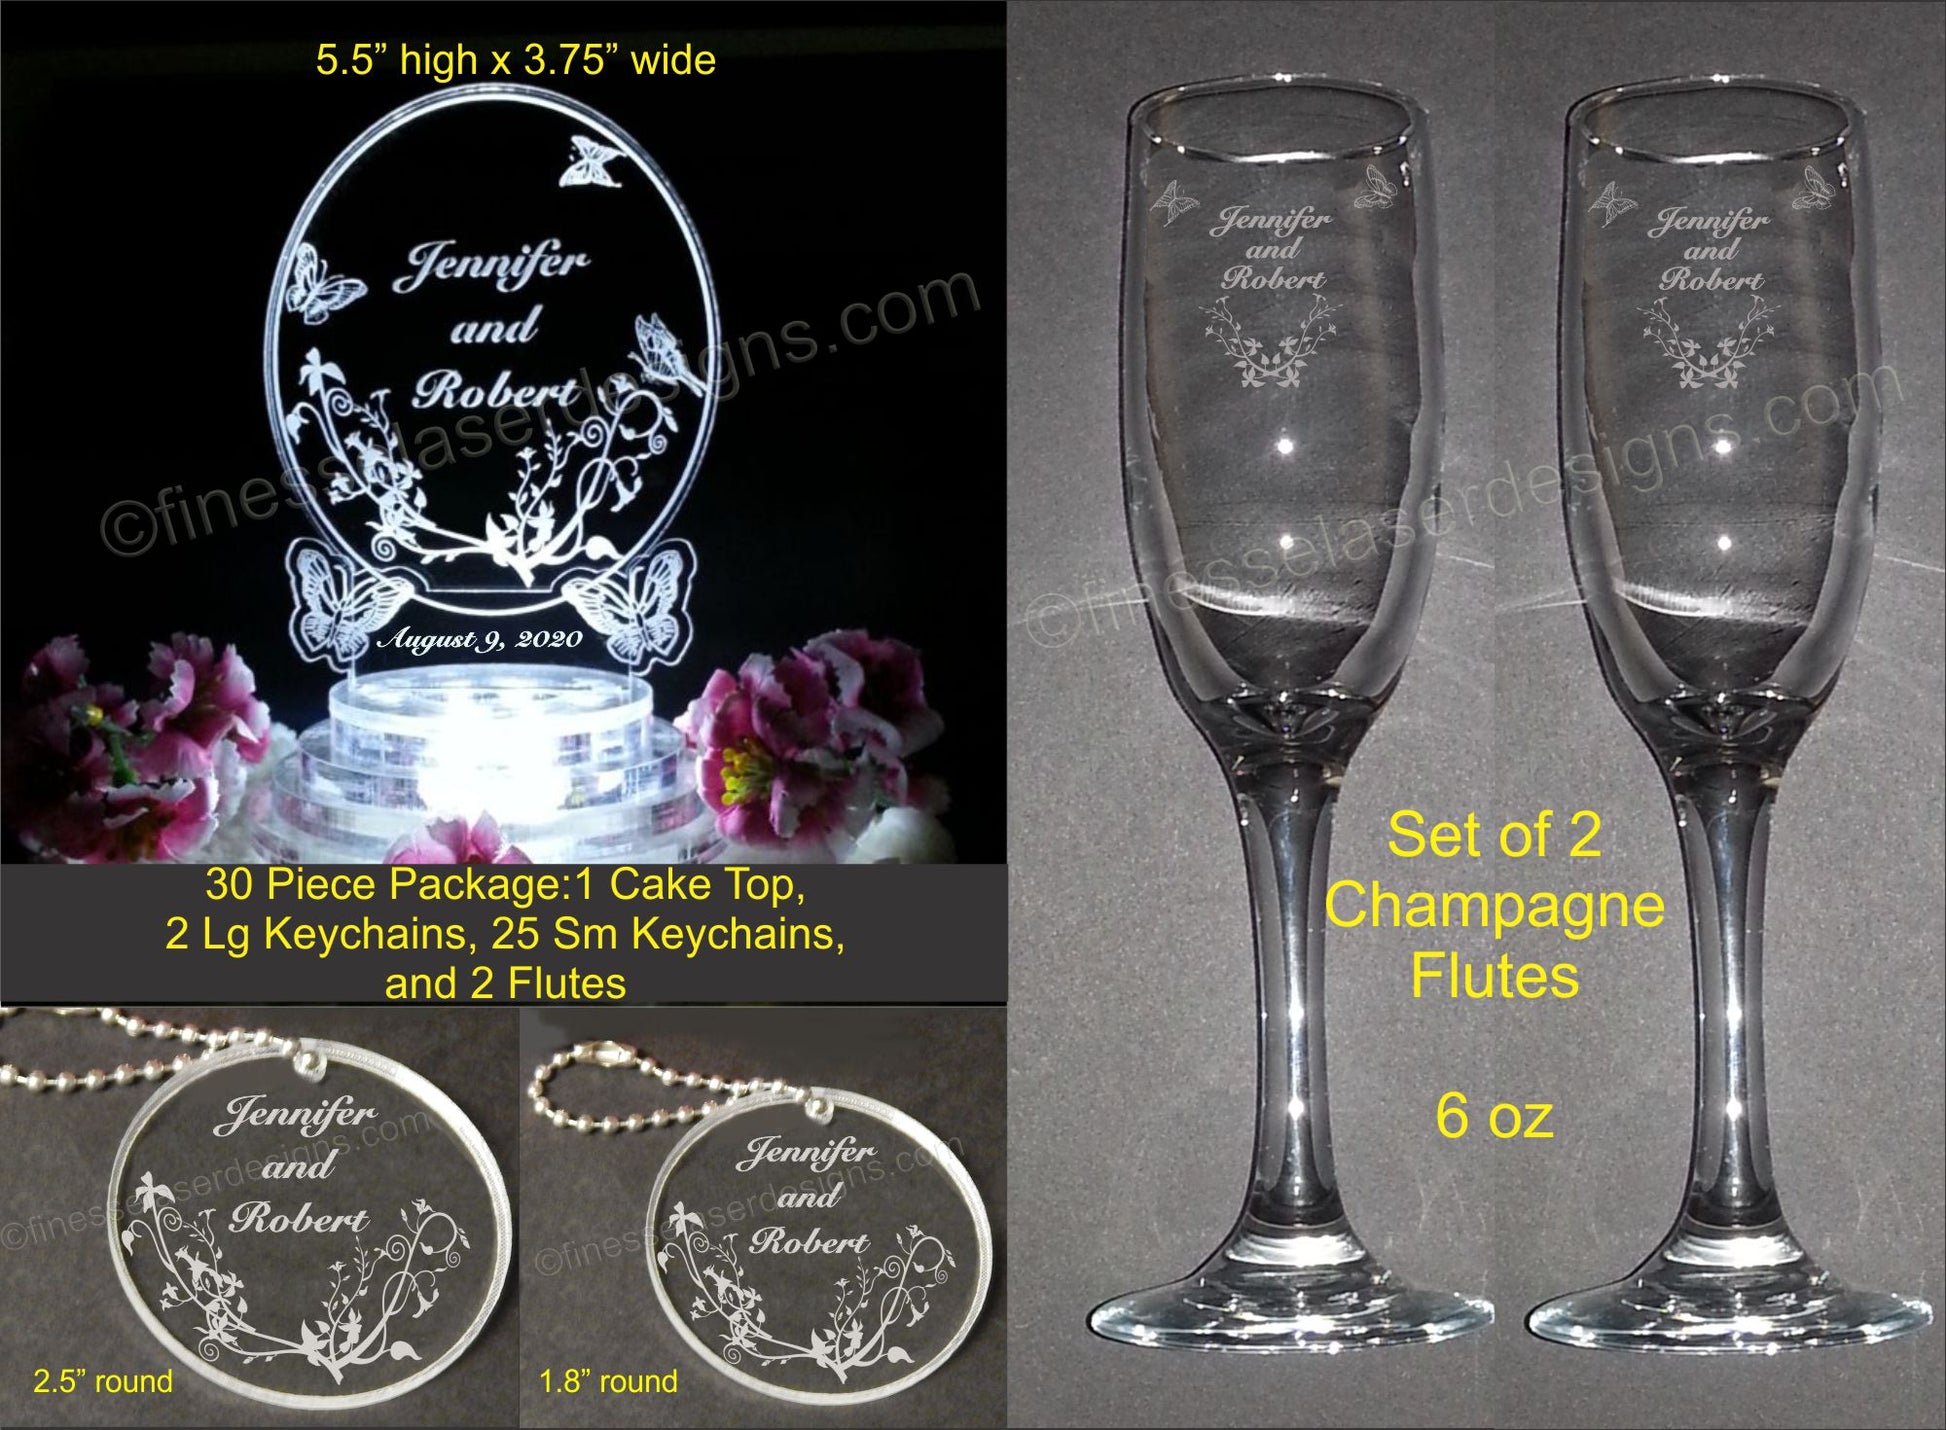 photo showing package that includes oval acrylic cake topper designed with butterflies, 2 sizes of keychain favors, and a set of champagne flutes with dimensions and information